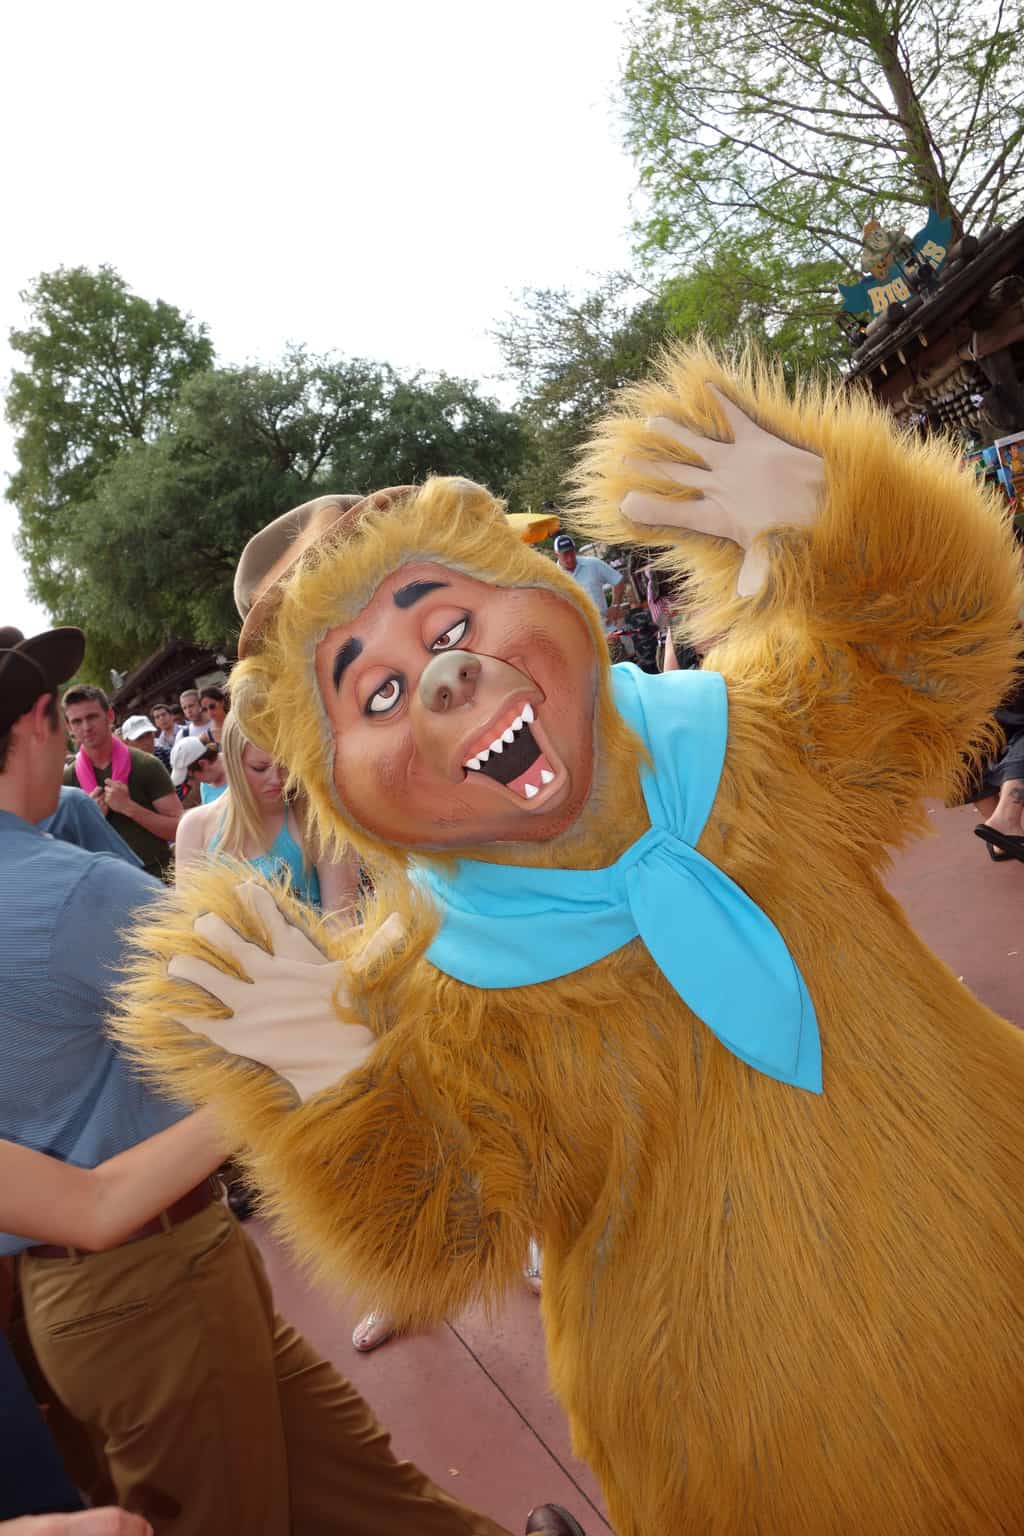 Wendell from the Country Bears at the Frontierland Hoedown Disney World Character meet and greet